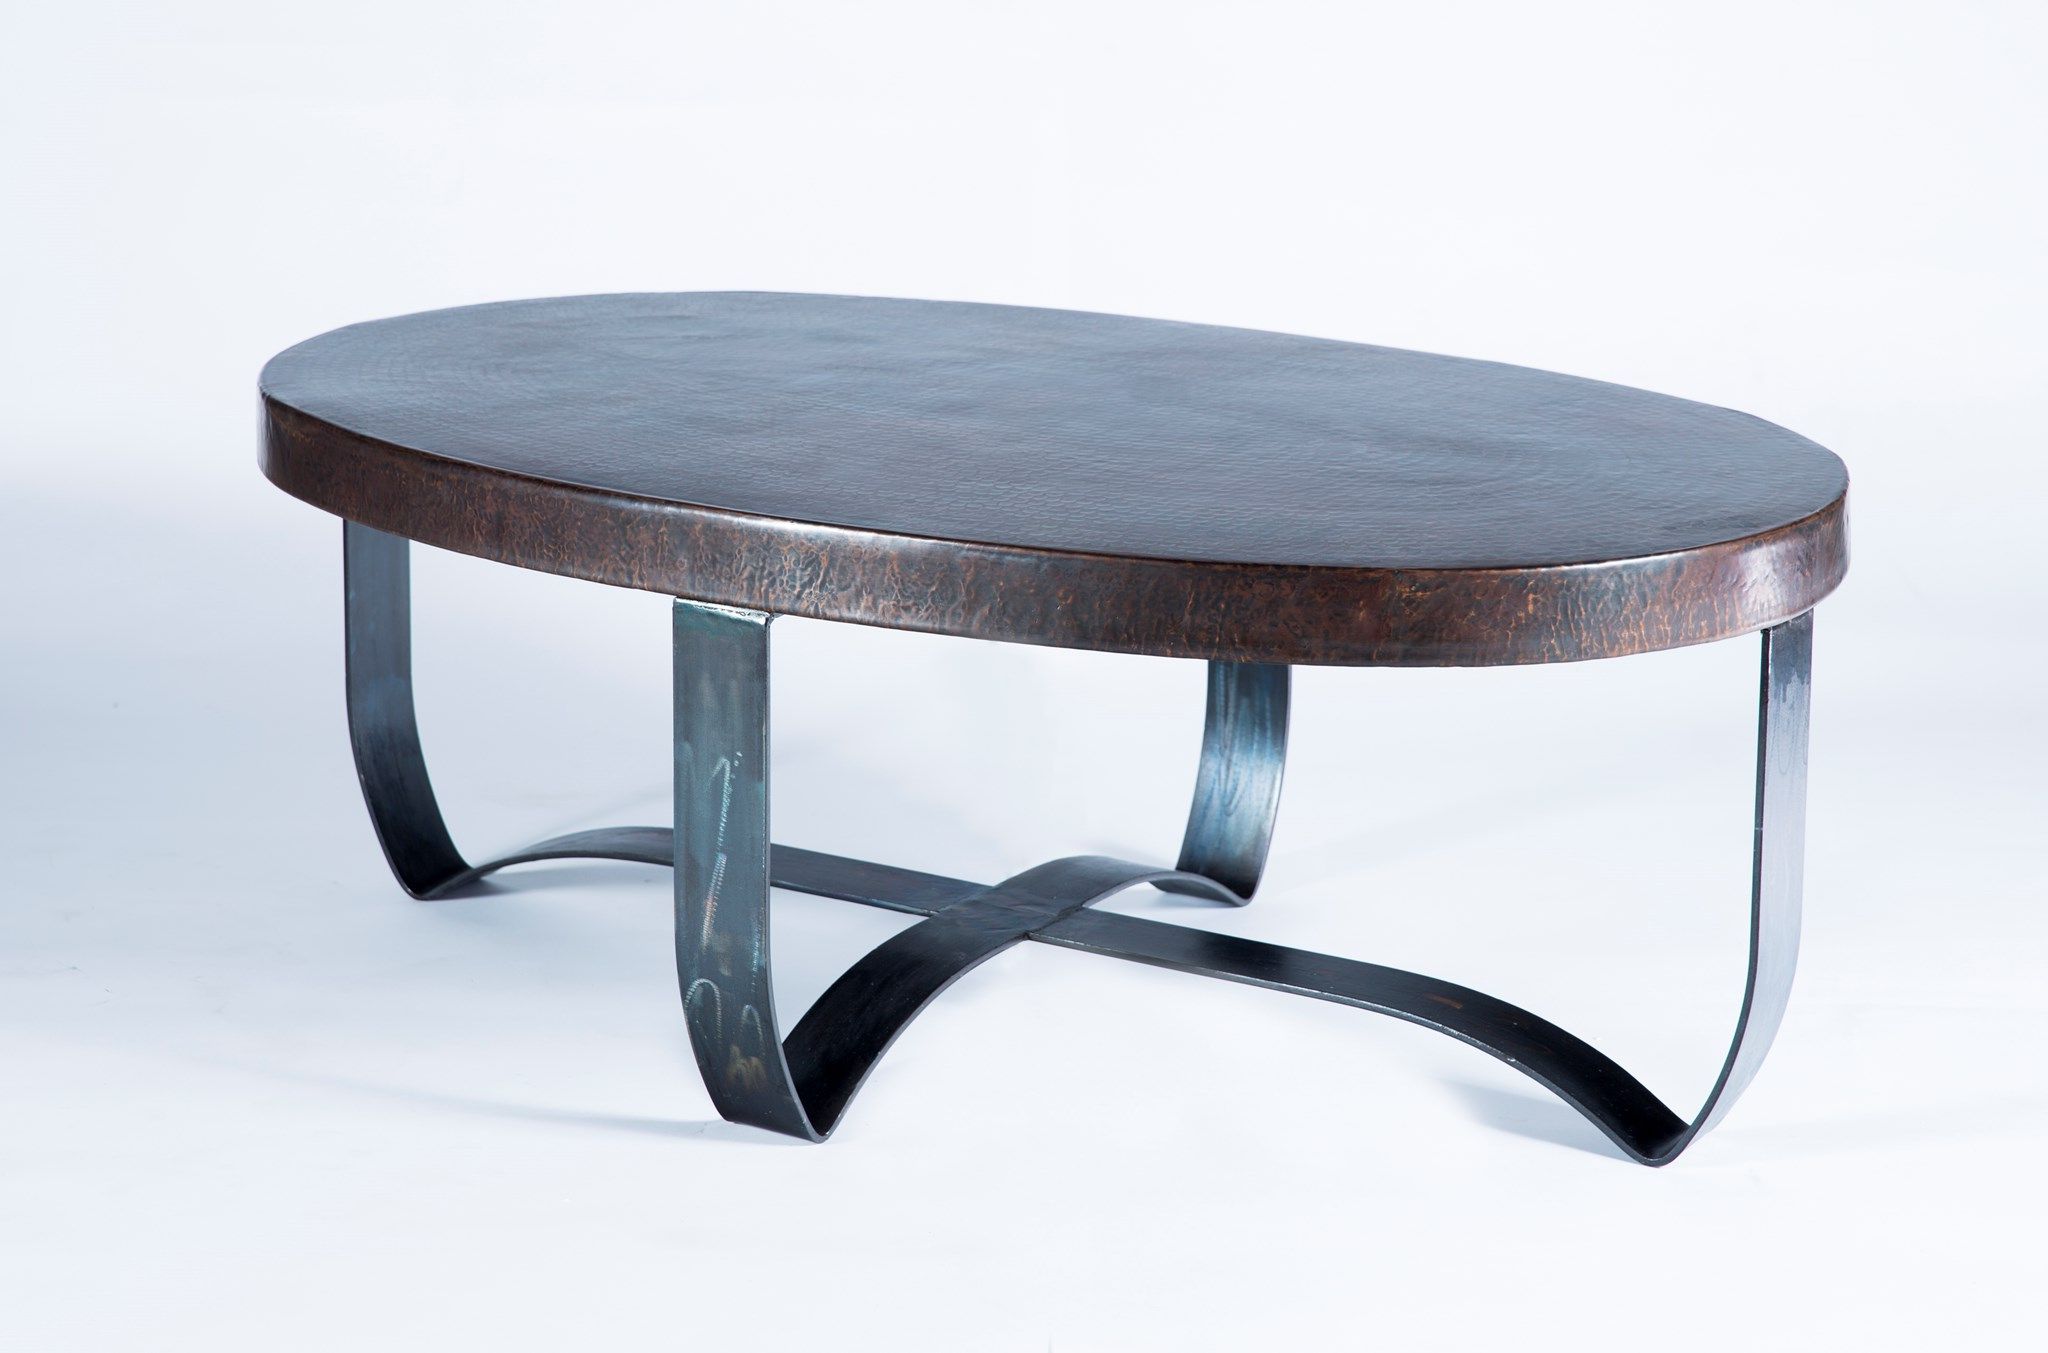 Hammered Antique Brass Modern Cocktail Tables In 2019 Oval Strap Cocktail Table With Dark Brown Hammered Copper Top (View 5 of 10)